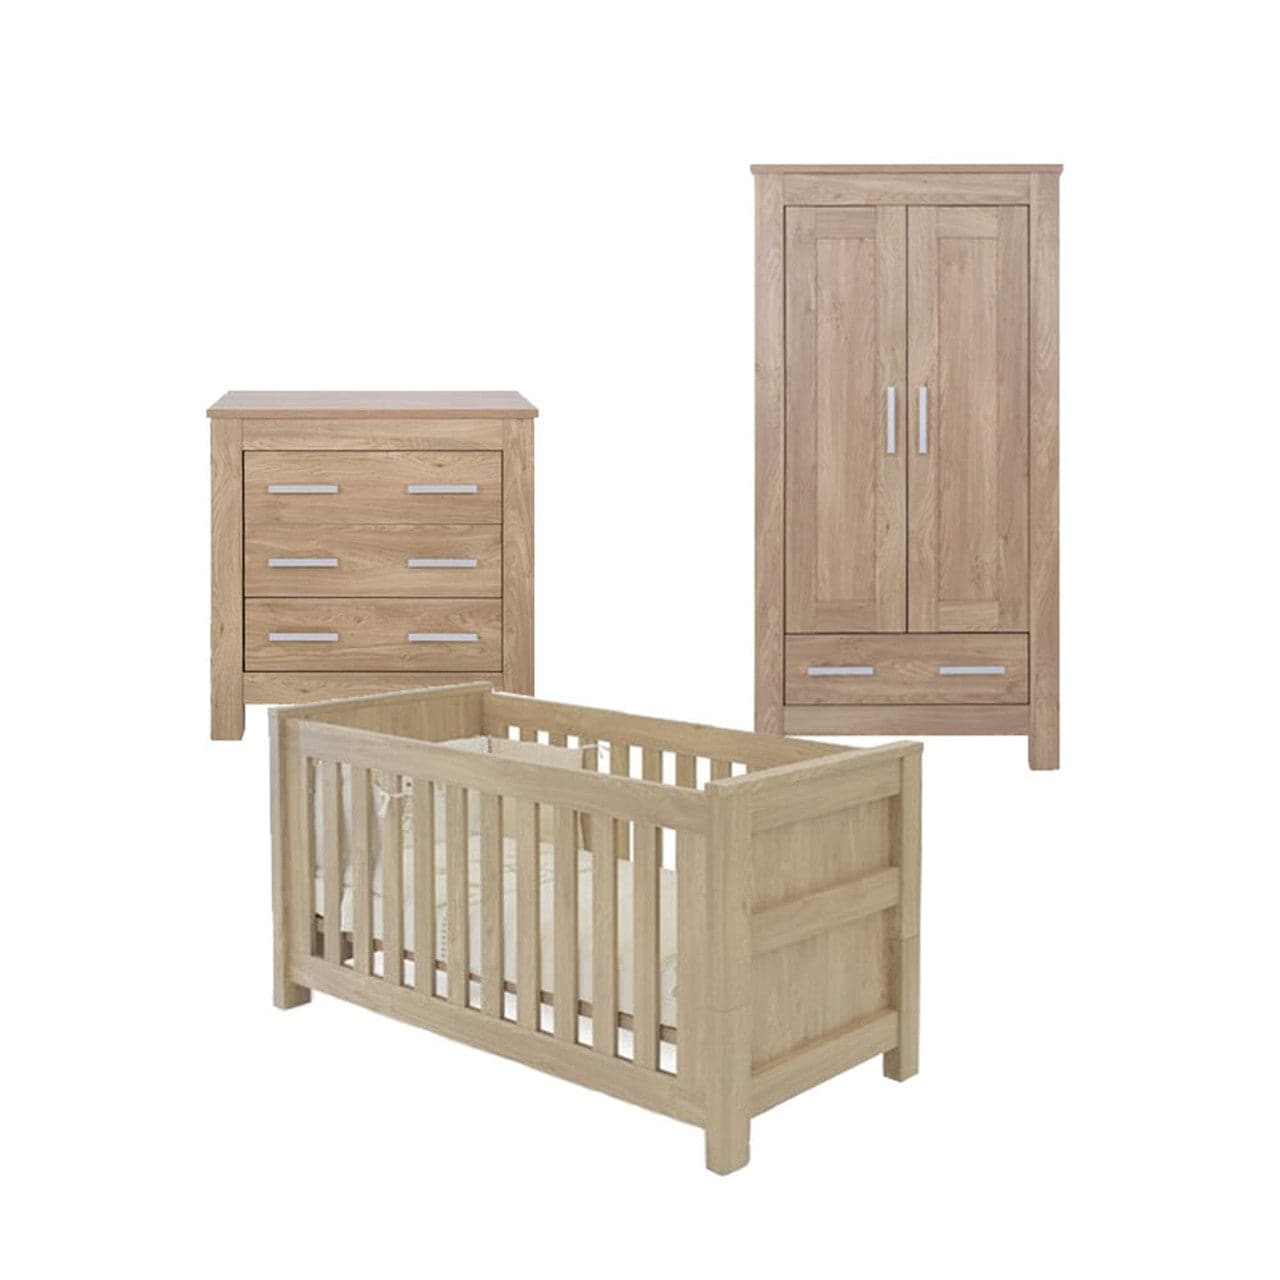 Babystyle Bordeaux Furniture + FREE Sprung Mattress - 3 Piece Room Set - For Your Little One